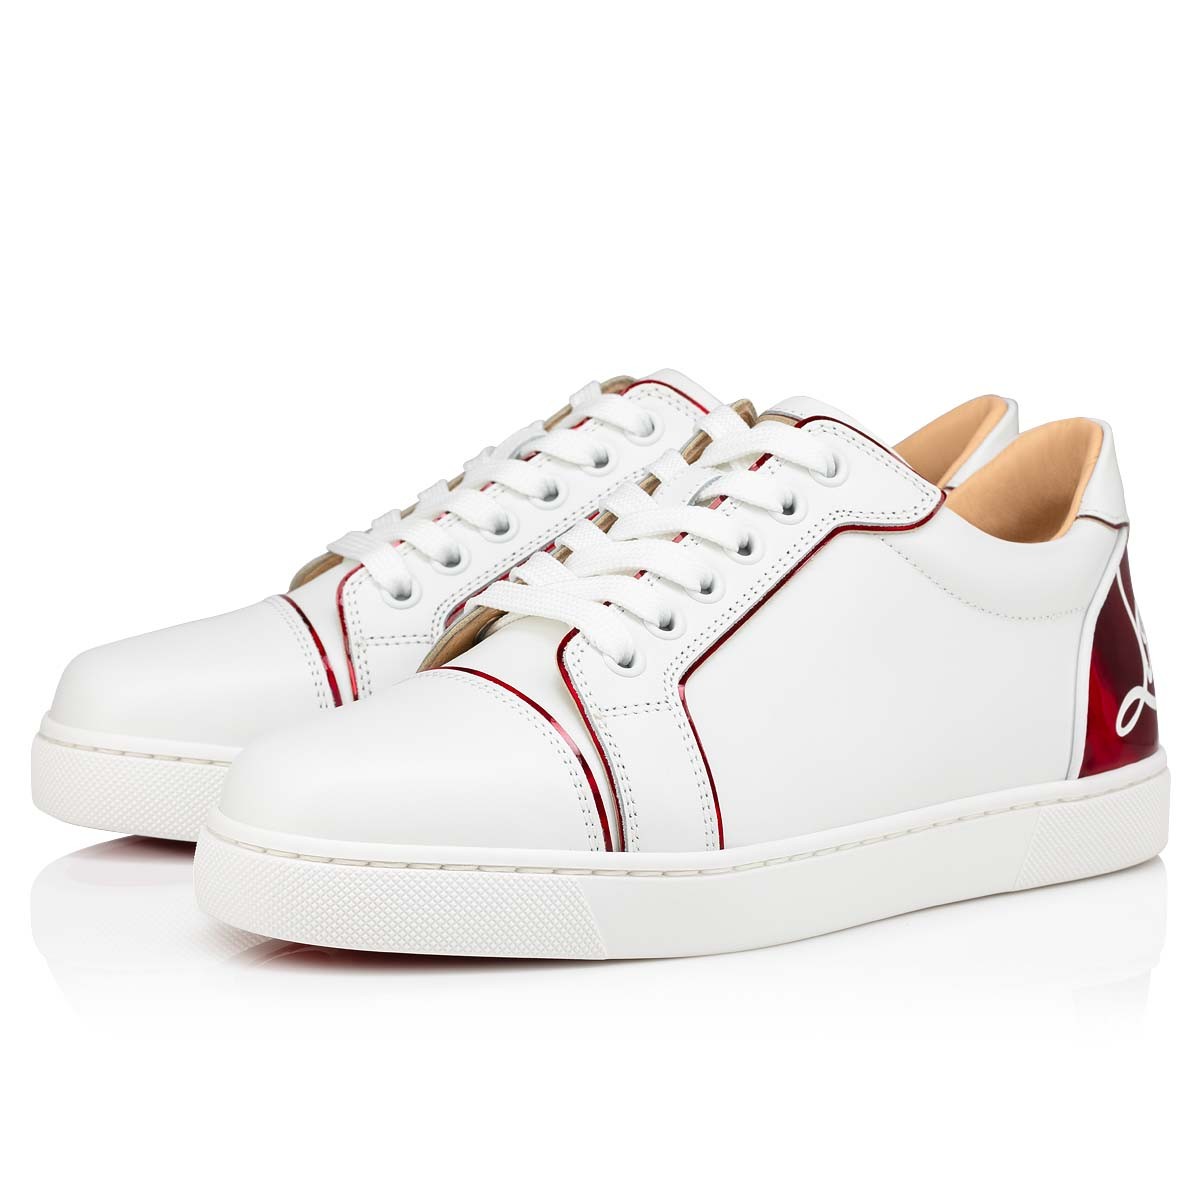 Fun Vieira Calf Leather, Patent Calf Leather Pyschic and Nappa Leather Bianco Sneakers